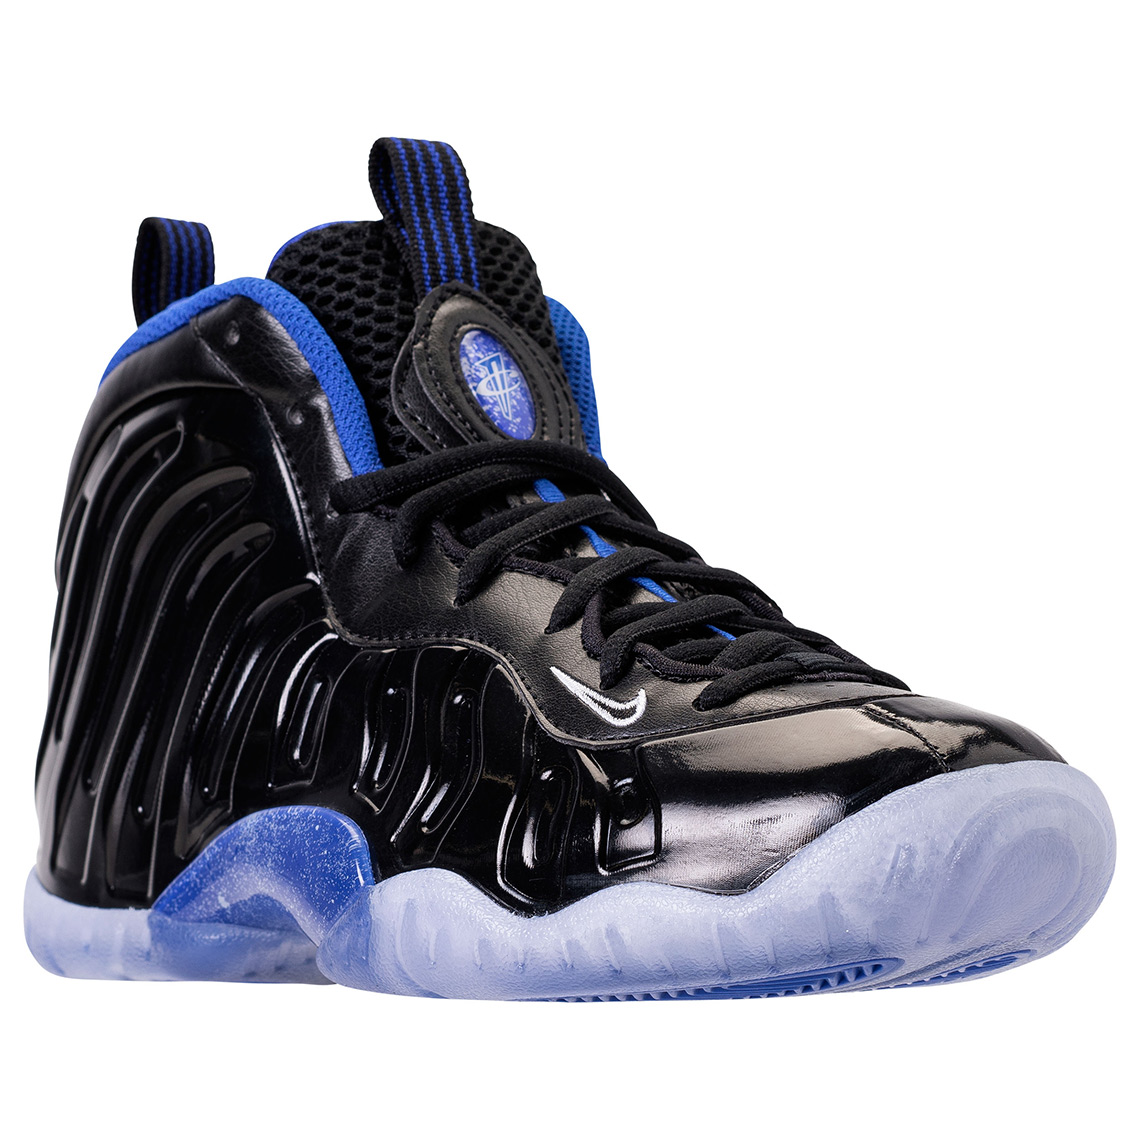 blue and black foamposites 2018